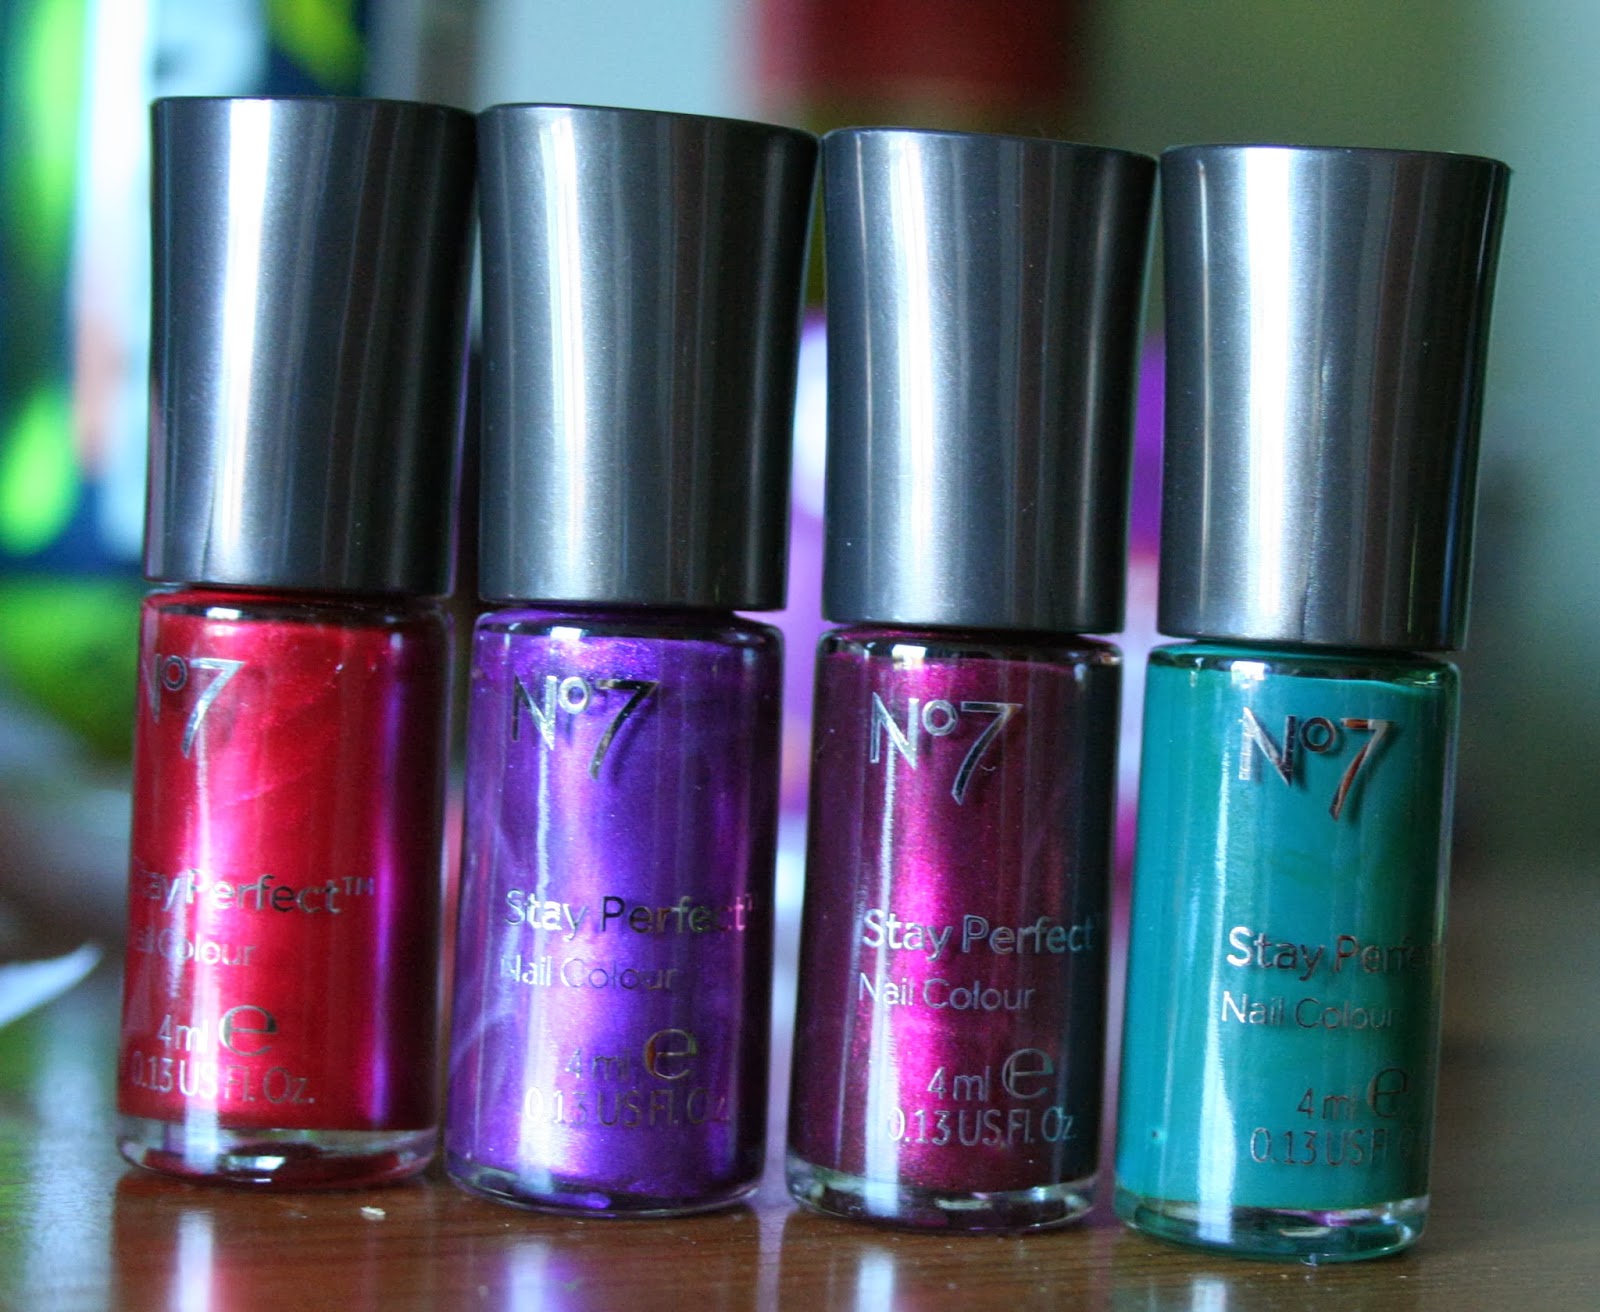 7. "Nail polish colors for older women" - wide 4